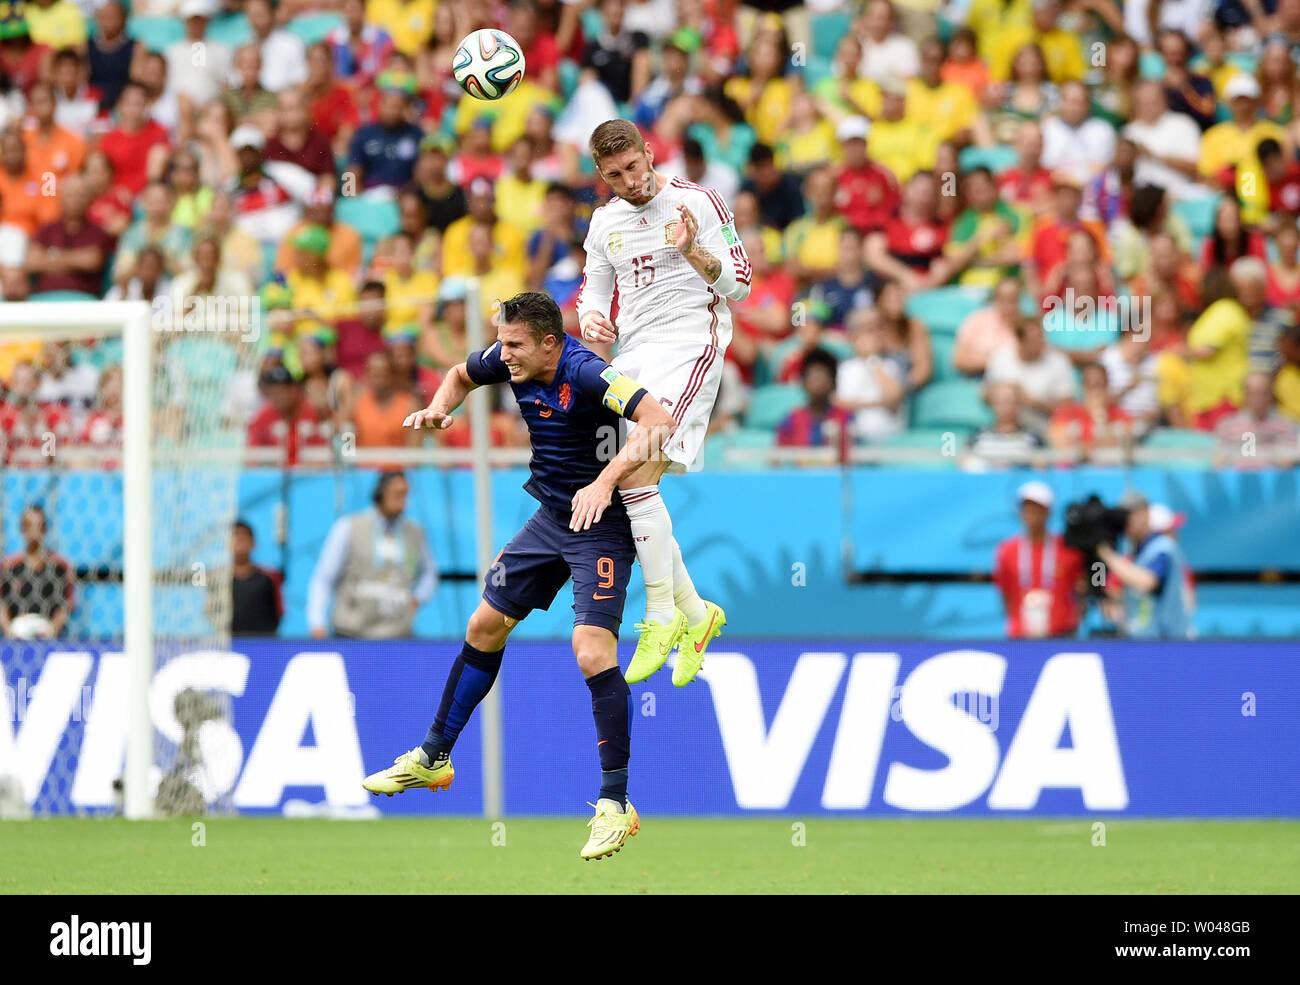 Sergio Ramos of Spain jumps with Robin Van Persie (L) of the Netherlands during the 2014 FIFA World Cup Group B match at the Arena Fonte Nova in Salvador, Brazil on June 13, 2014. UPI/Chris Brunskill Stock Photo